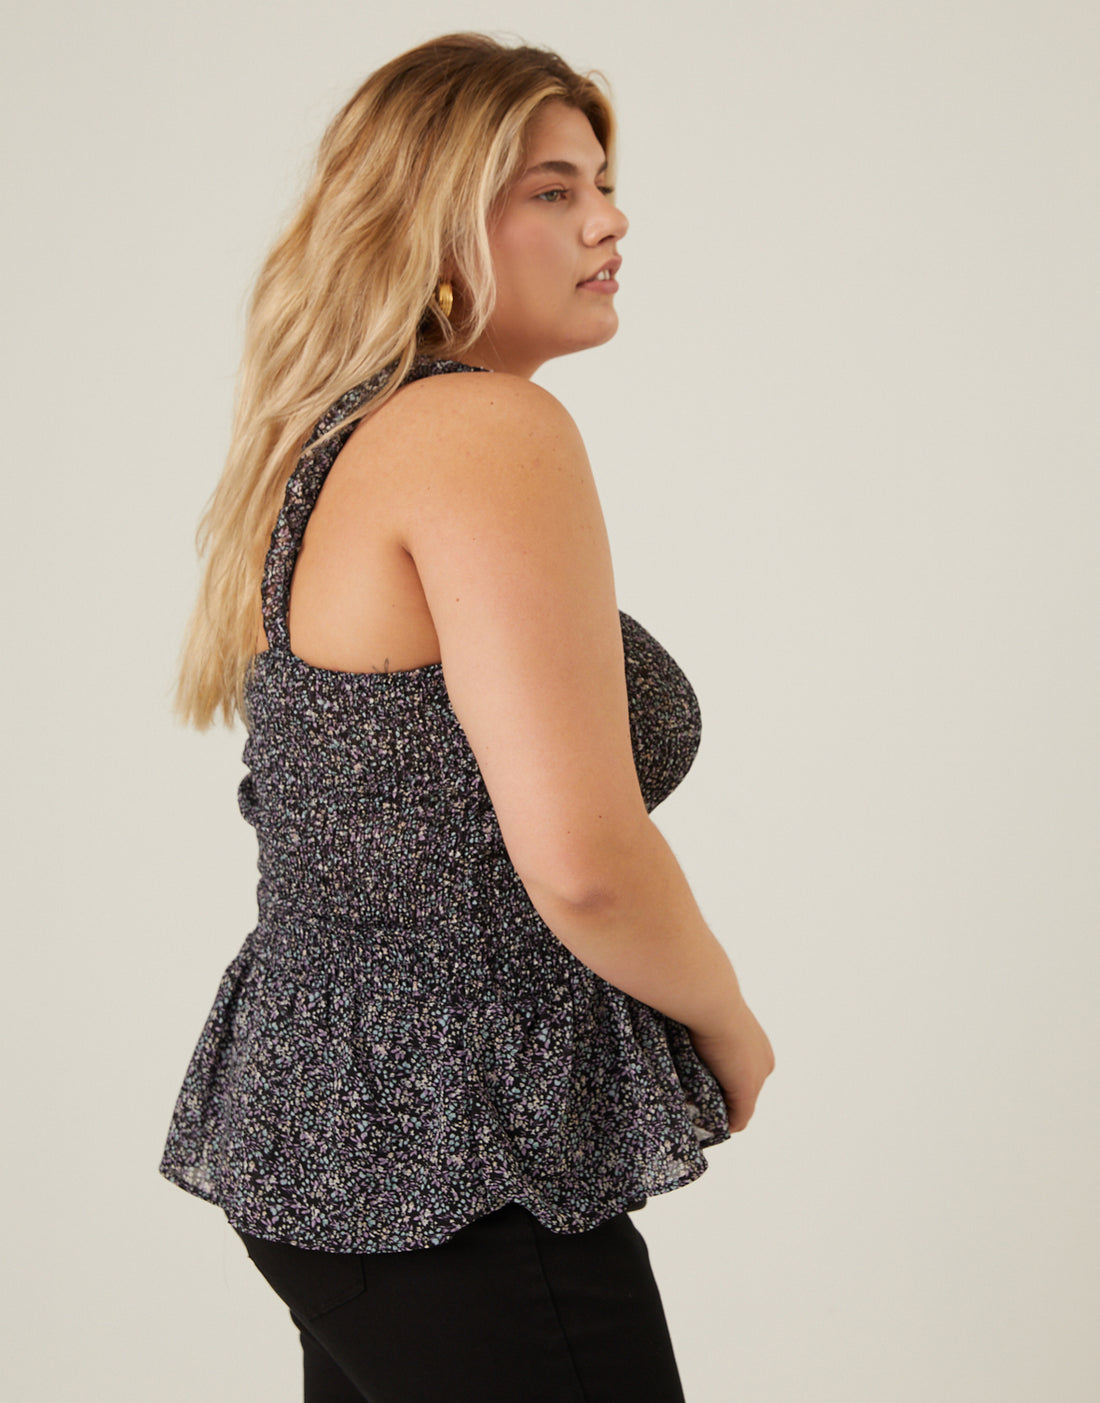 Curve Smocked Ruffle Floral Tank Plus Size Tops -2020AVE